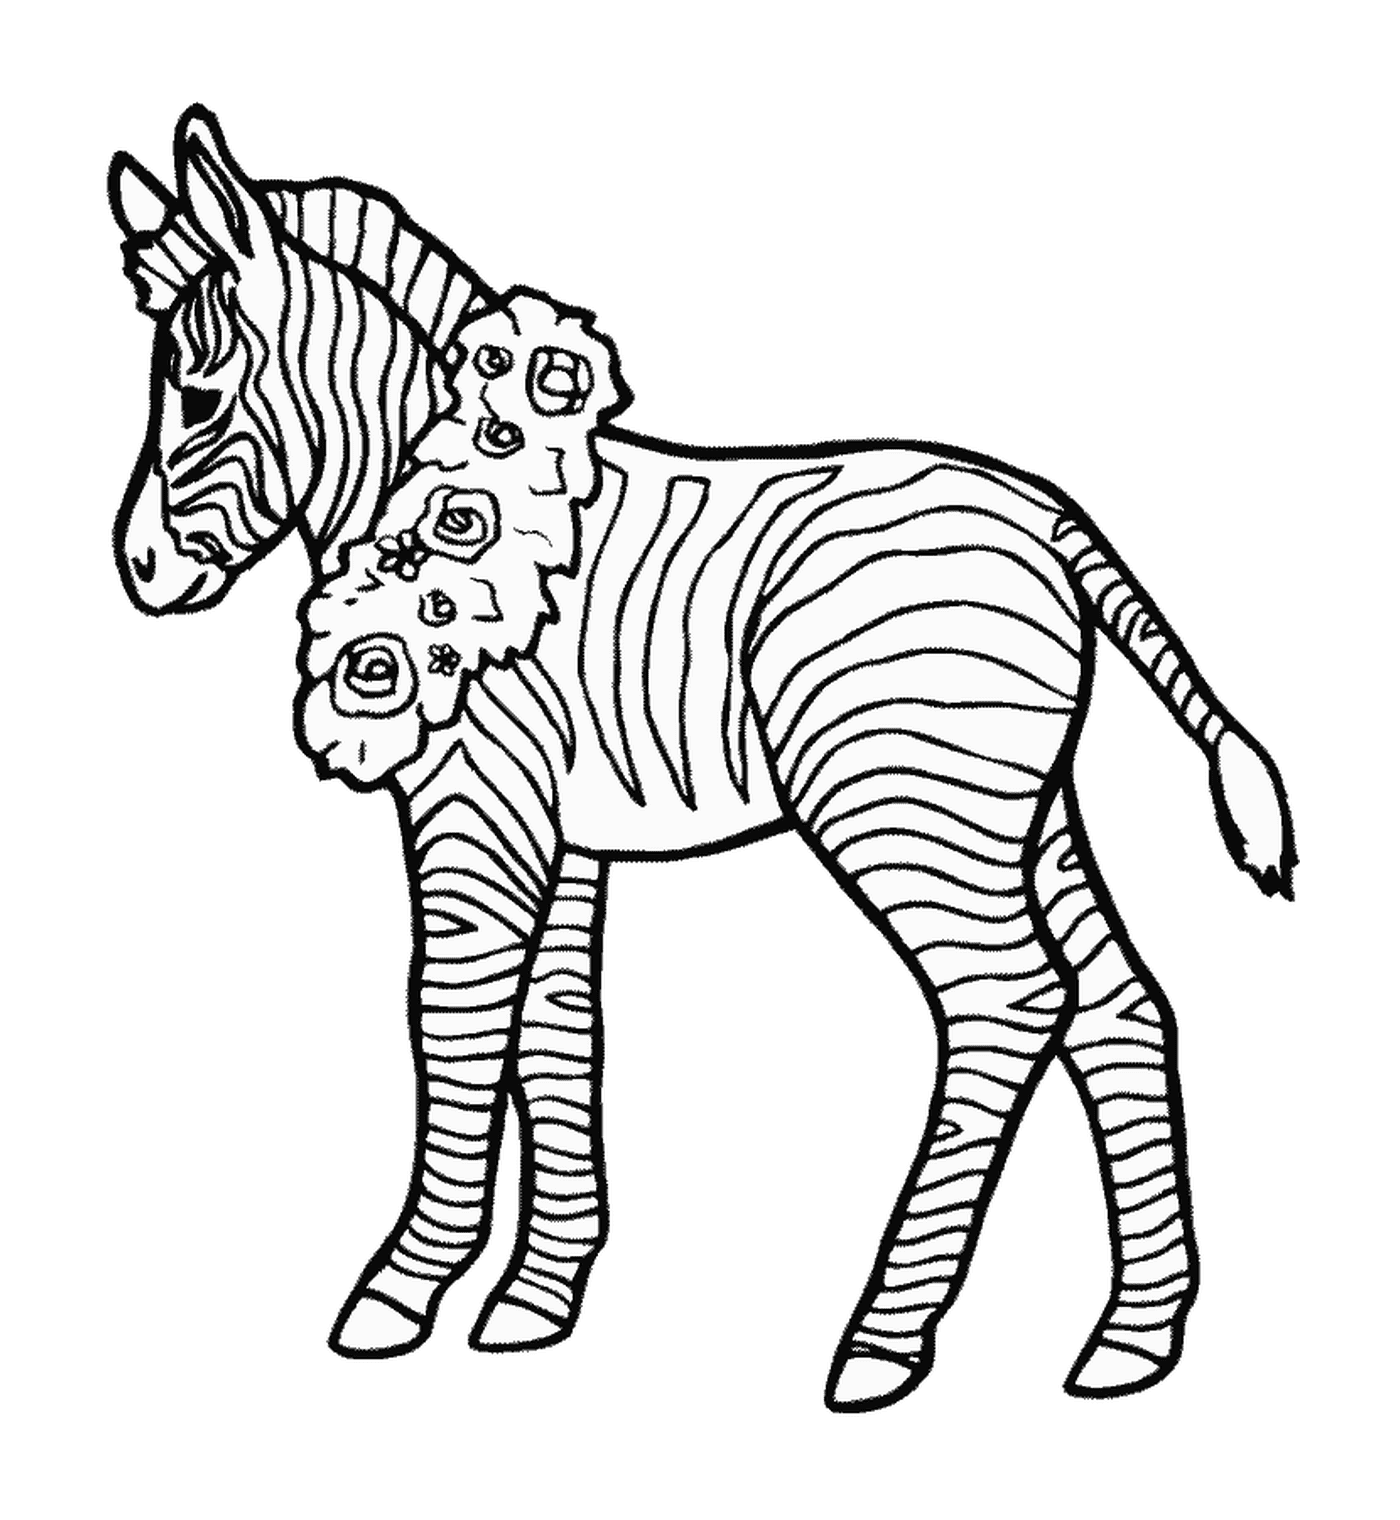  A zebra with a necklace of flowers 